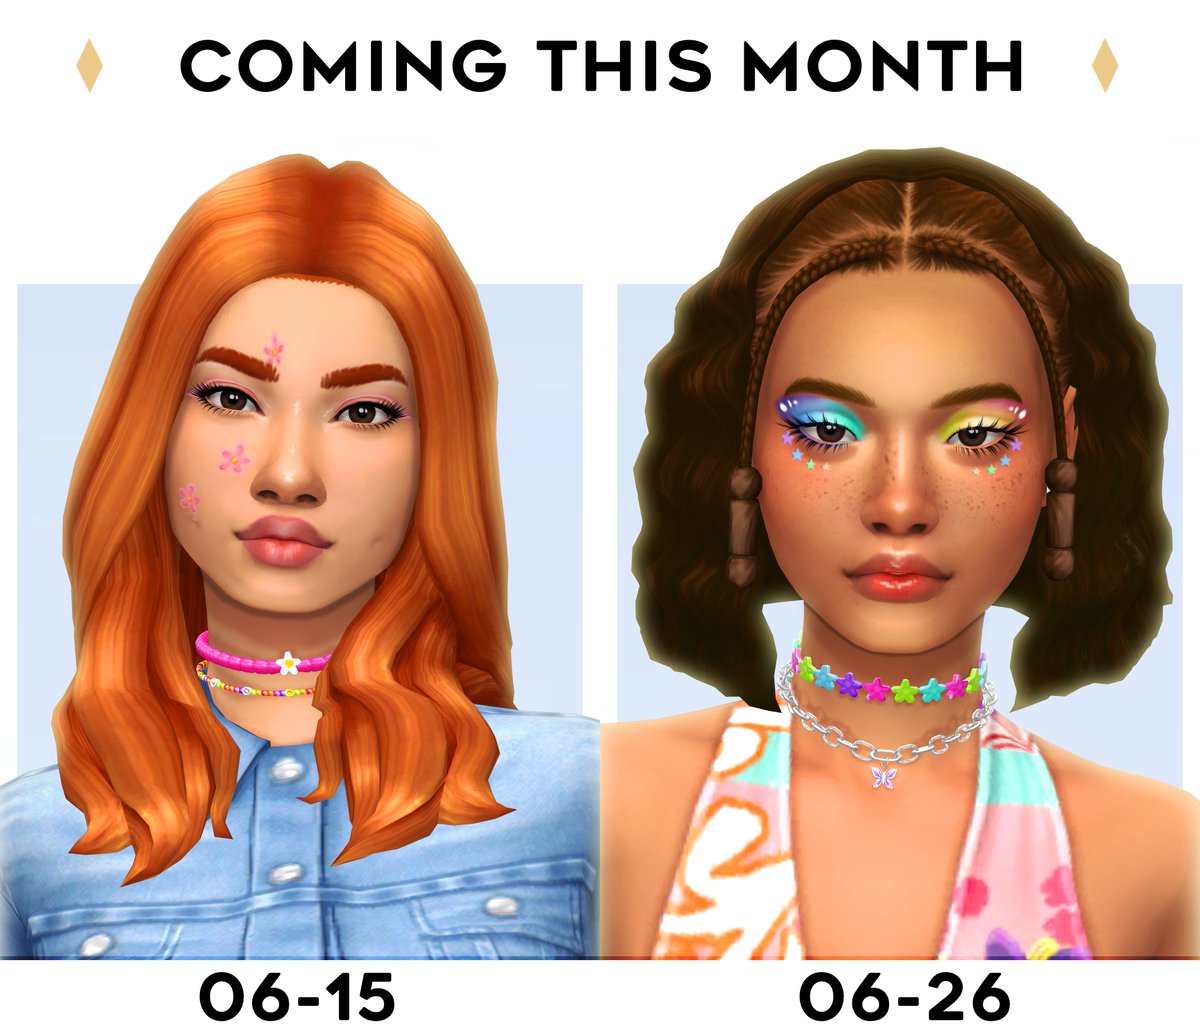 COMING IN JUNE 🌈

You can get these hairstyles early on my patreon right now or get them publicly on the dates below!   

🔗patreon.com/imvikai

#ts4 #ts4cc #s4cc #TheSims4 #TheSims